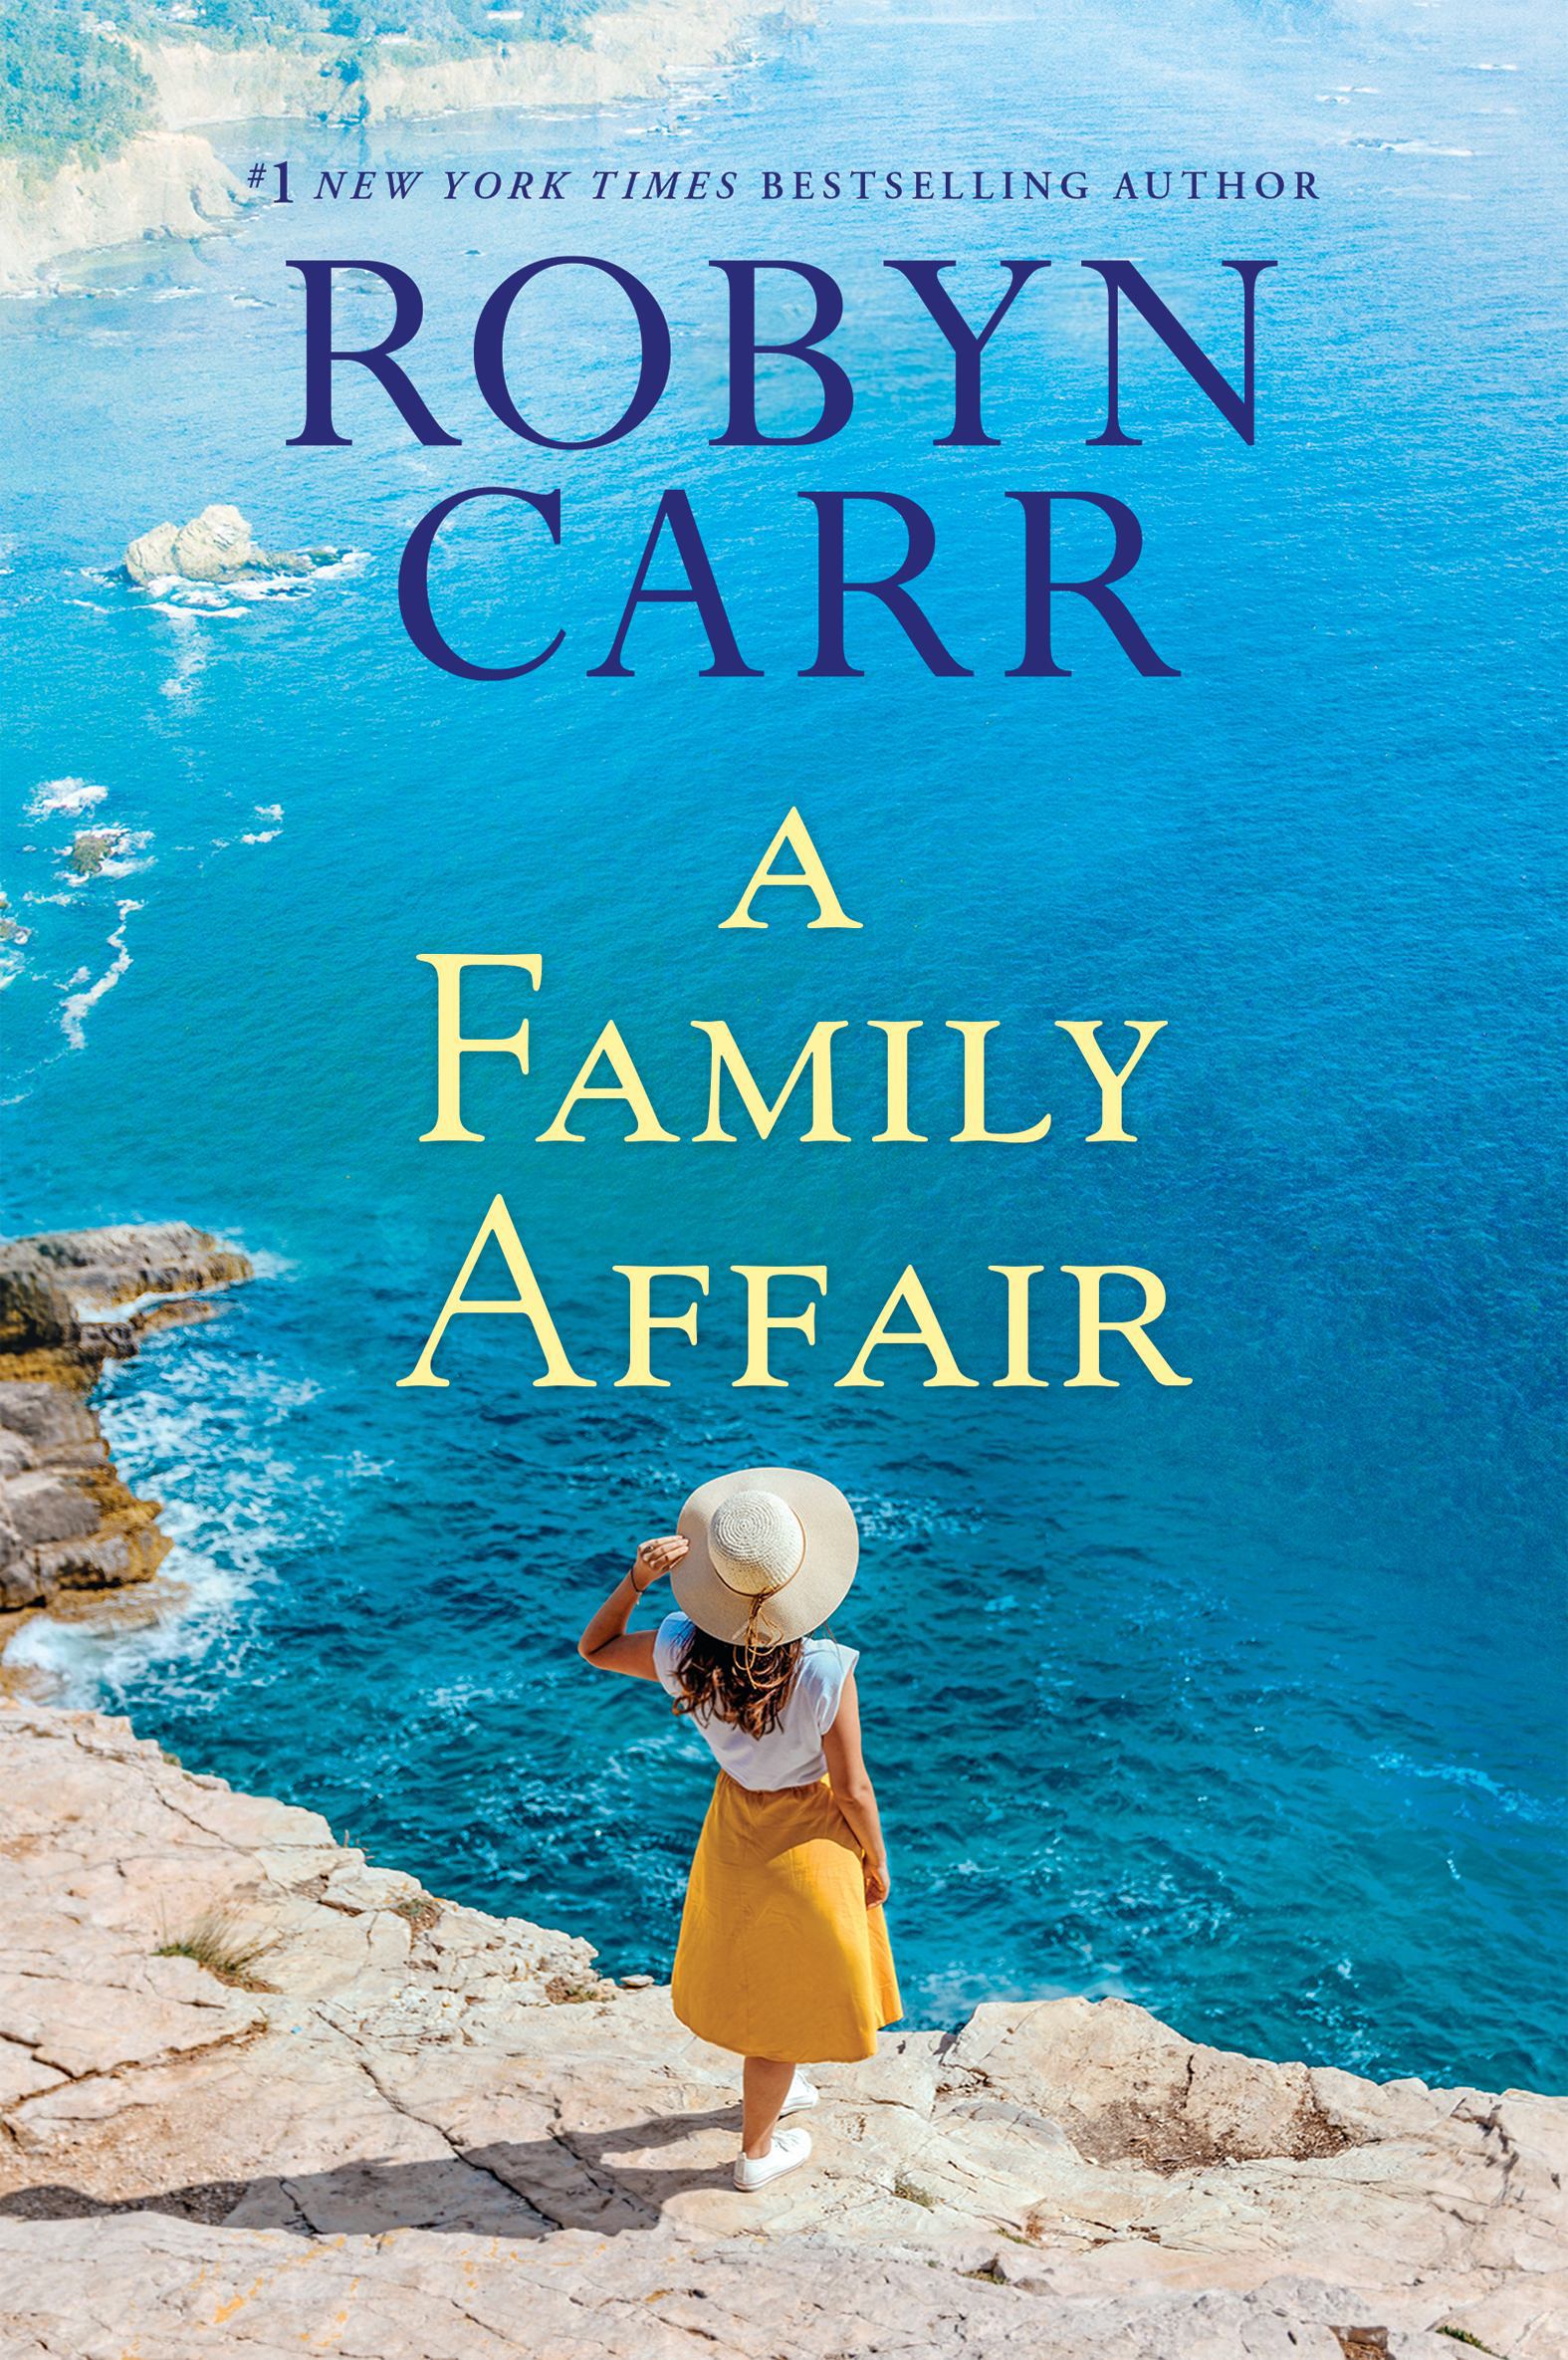 New and Releases RobynCarr